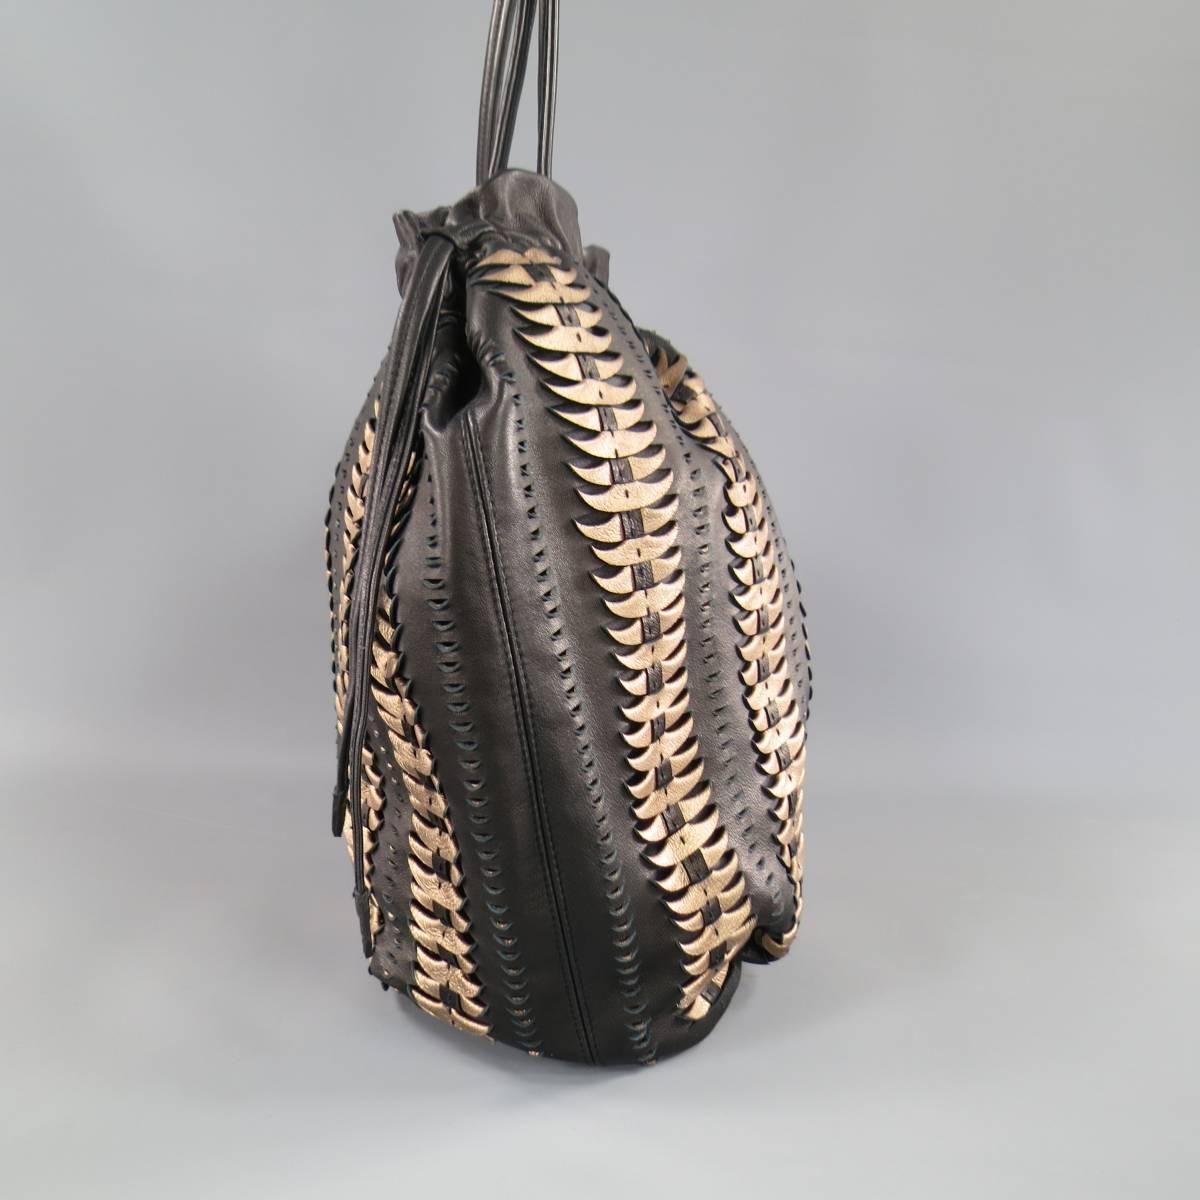 This gorgeous ELIE TAHARI tote bag comes in smooth black leather with gorgeous metallic copper pebbled leather woven in stripes throughout and features a round, pleated shape, drawstring top with side pulls & magnetic closure, and skinny shoulder